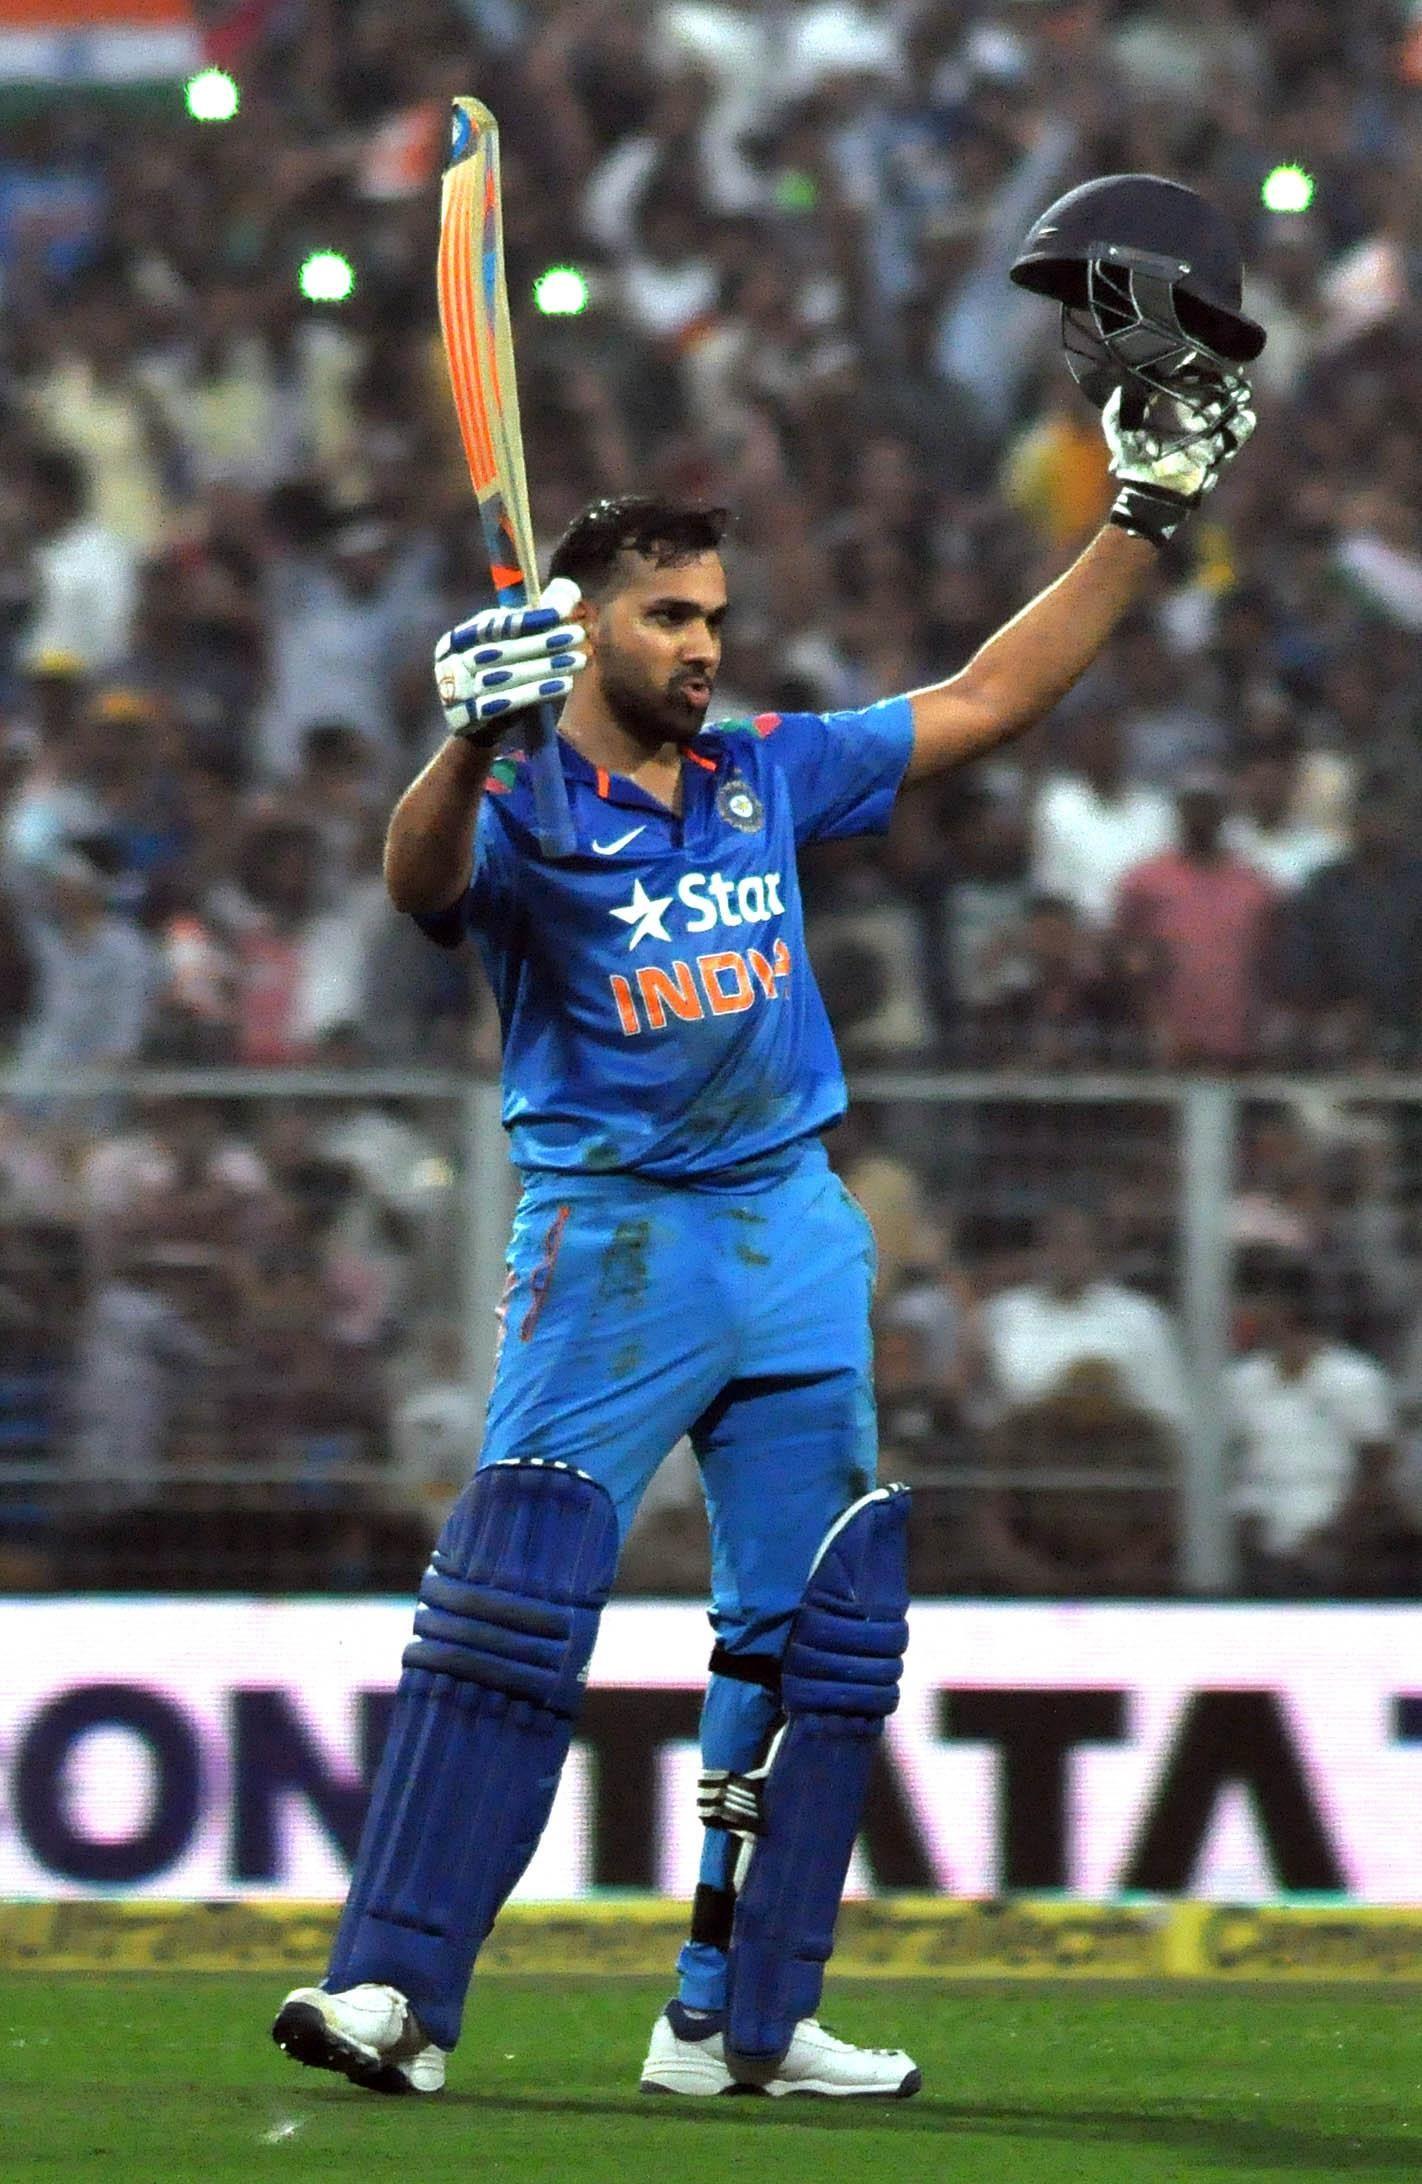 Difficult to surpass Rohit Sharma's 264: Lara. South Asian Daily